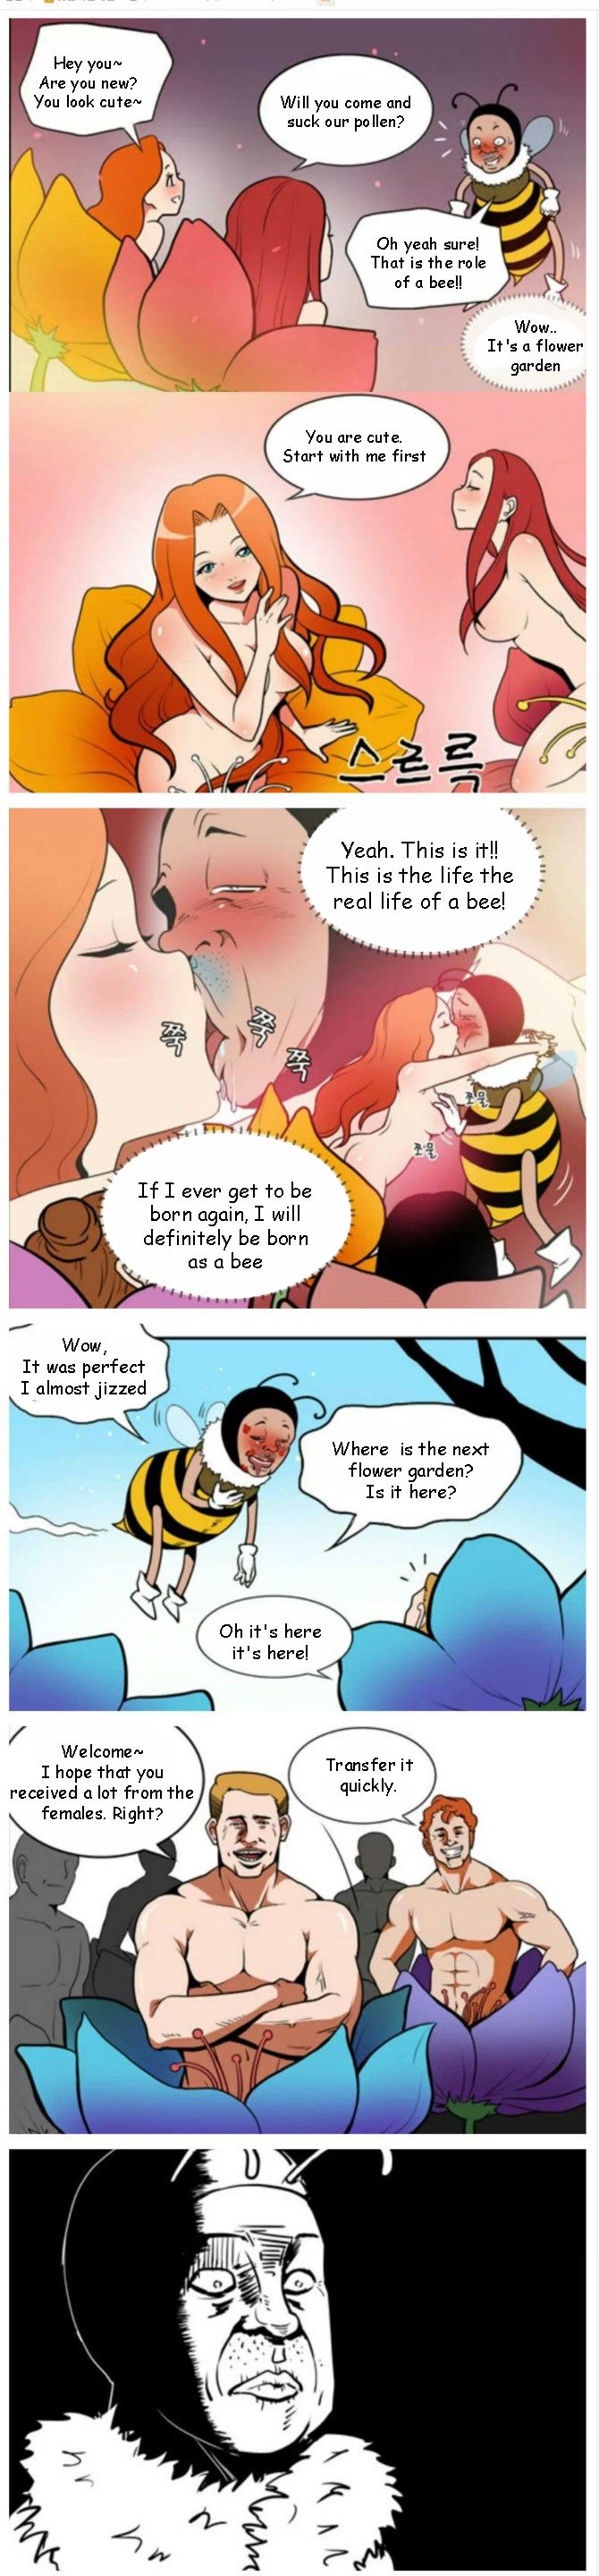 The life of a bee